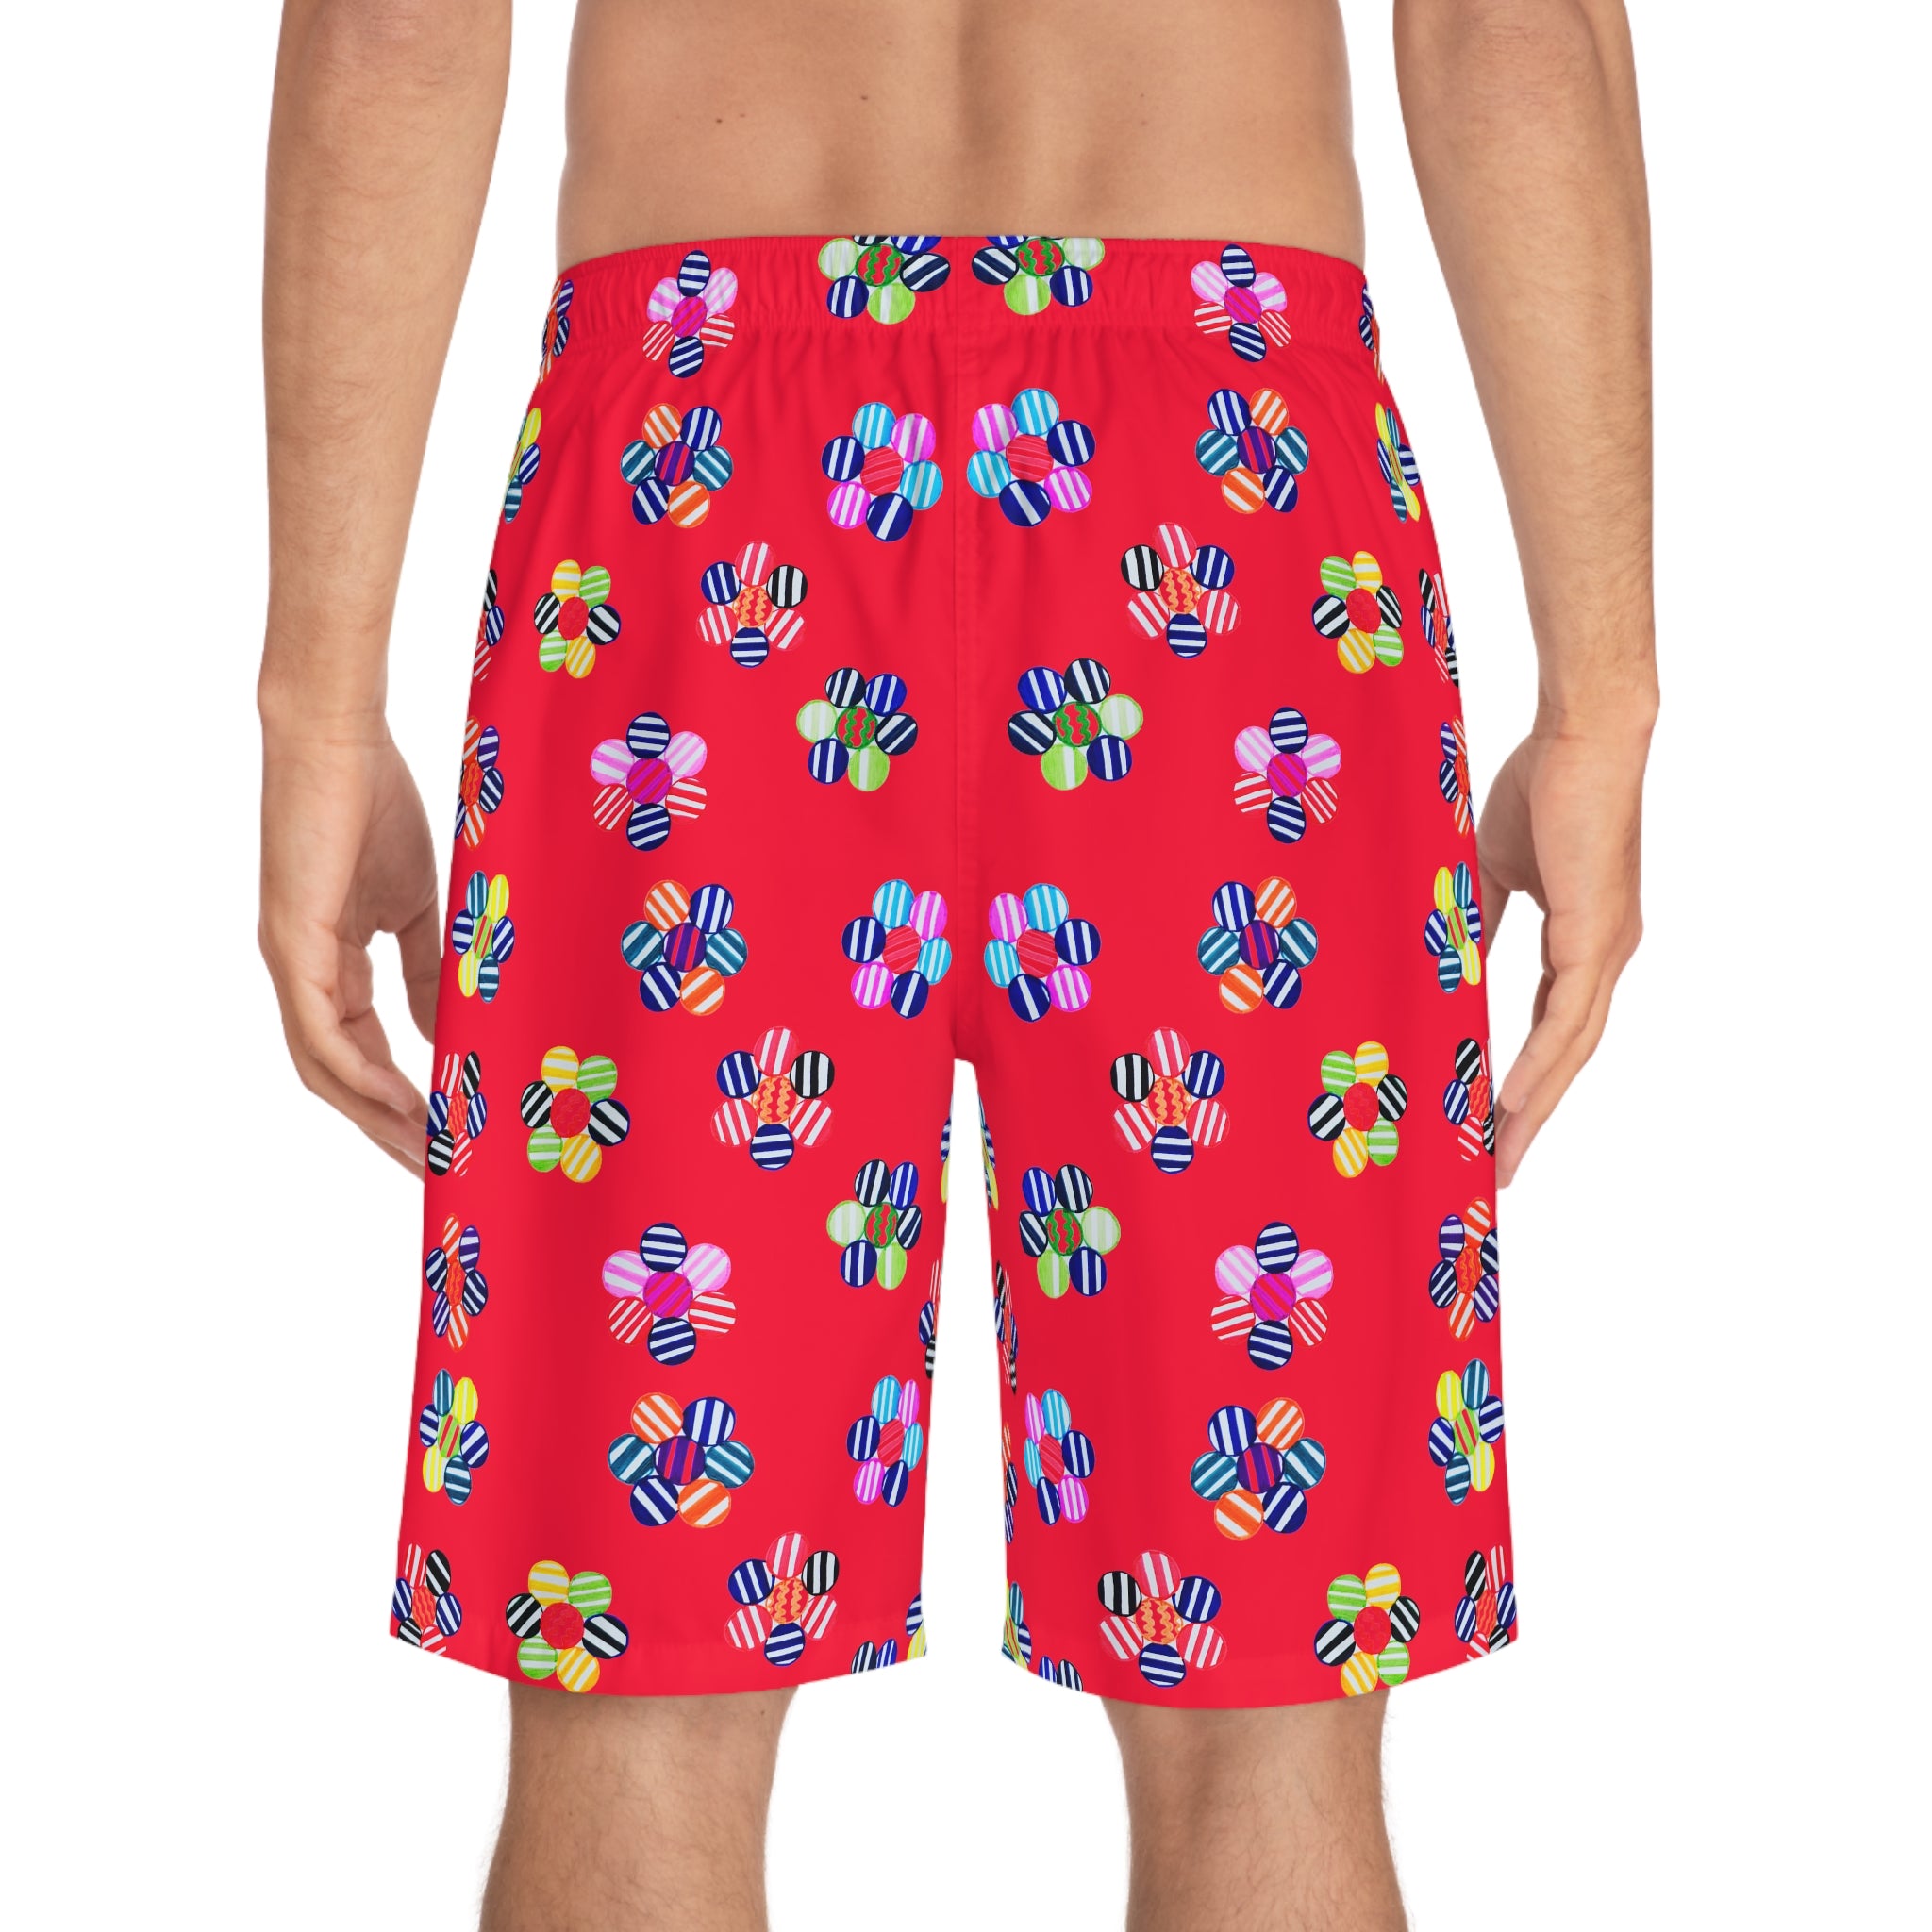 red geometric floral board shorts for men with elastic waistband